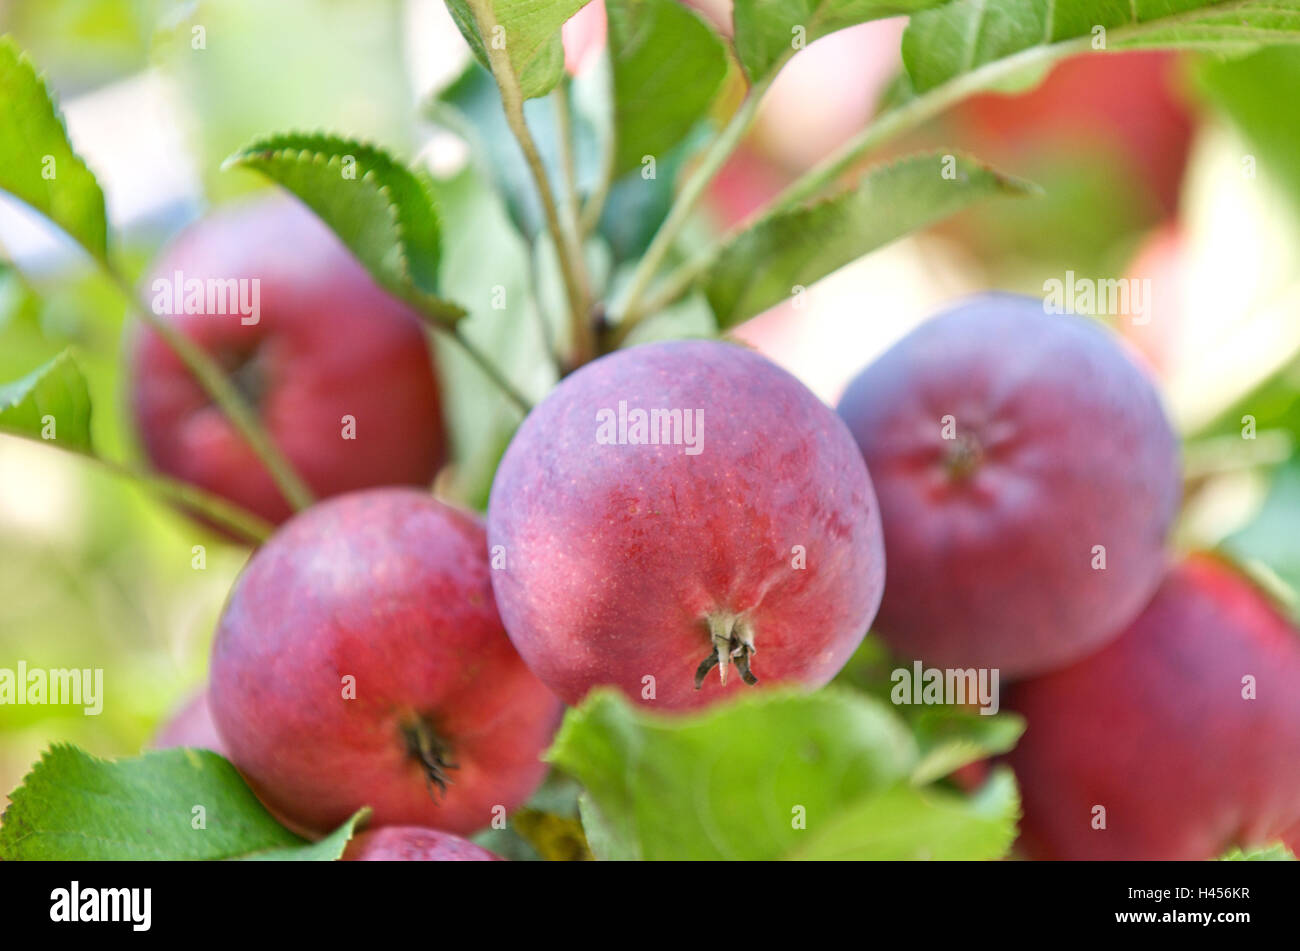 Apple tree, branch, apples, red, ripe, close-up, Stock Photo